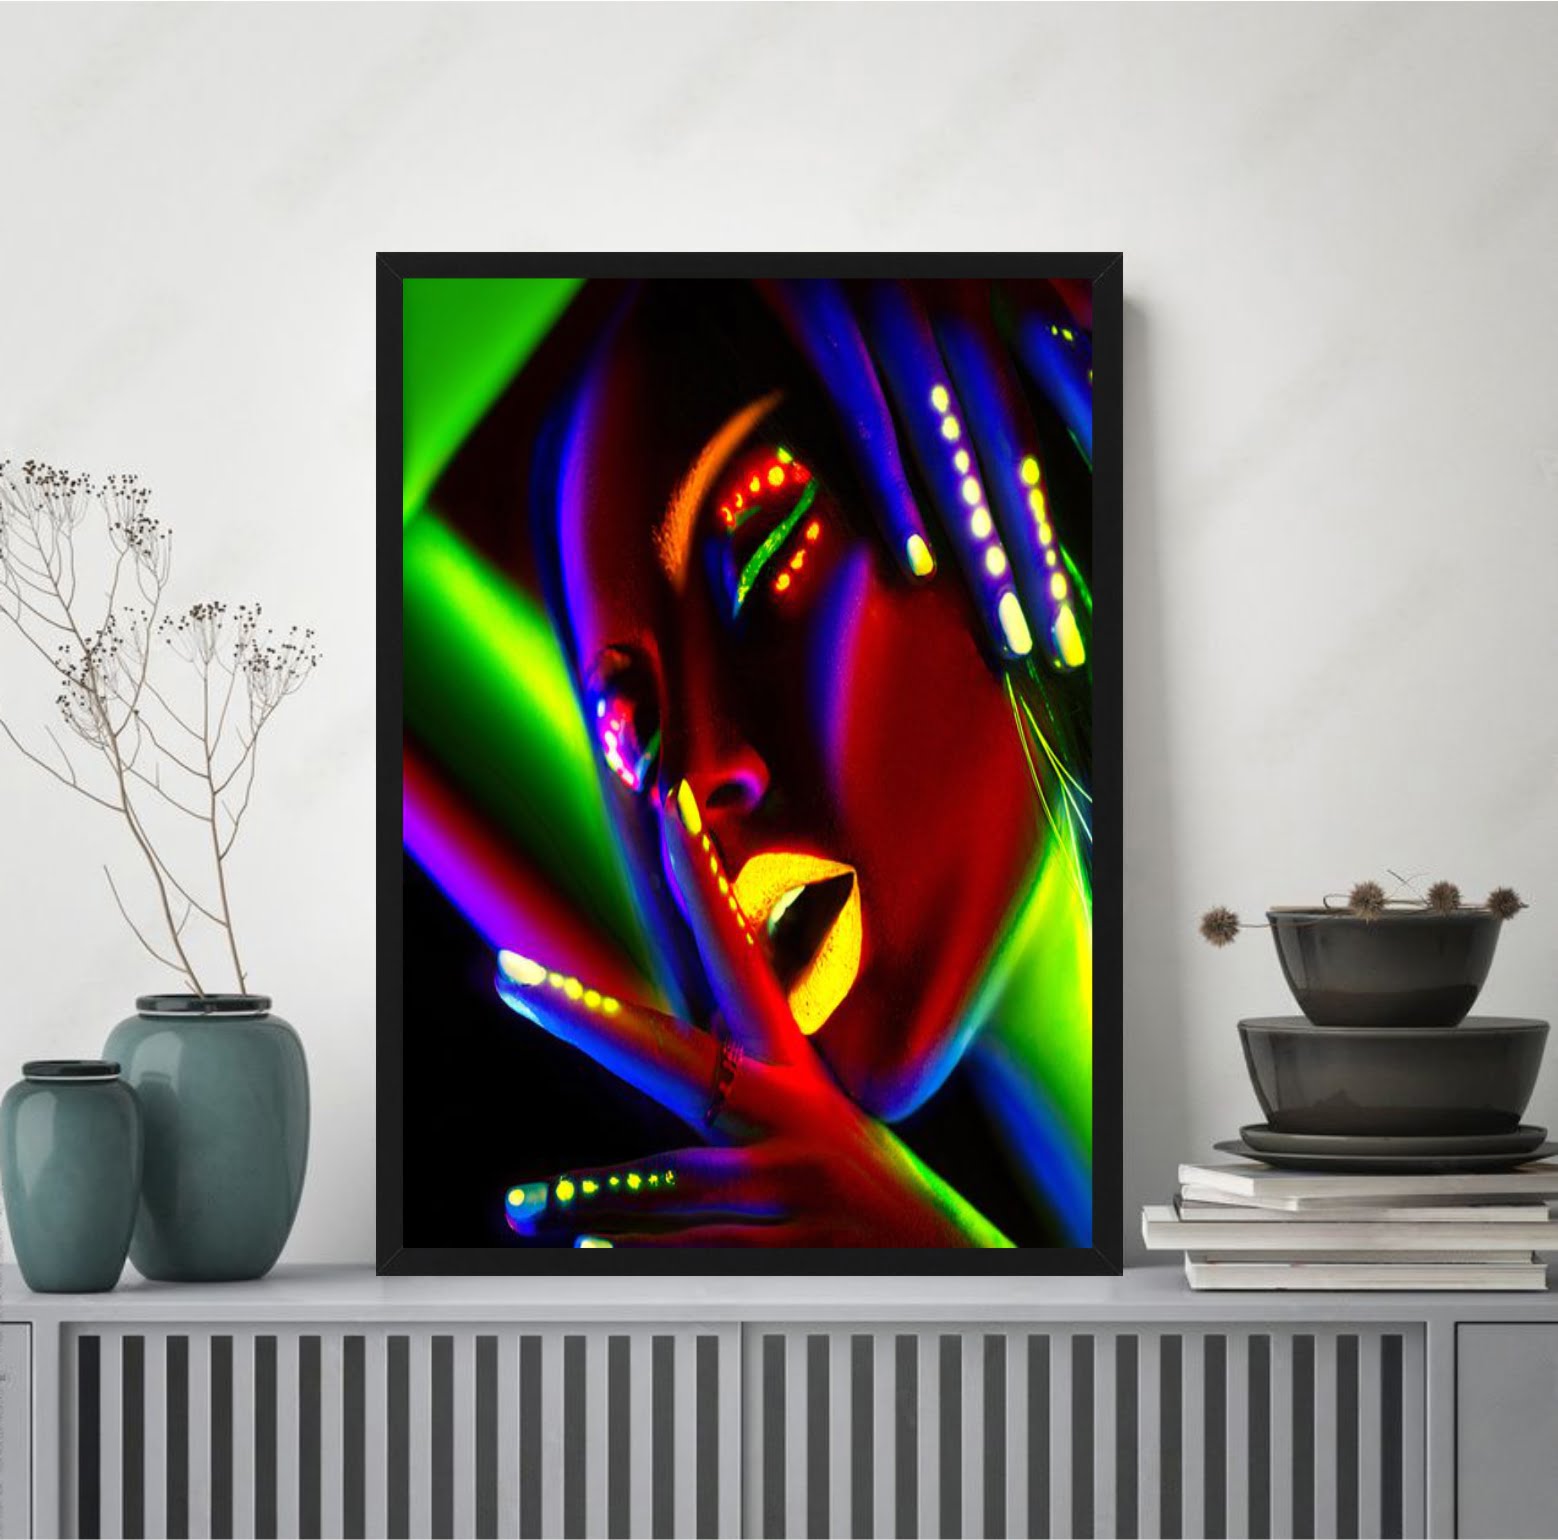 Neon lady picture frame